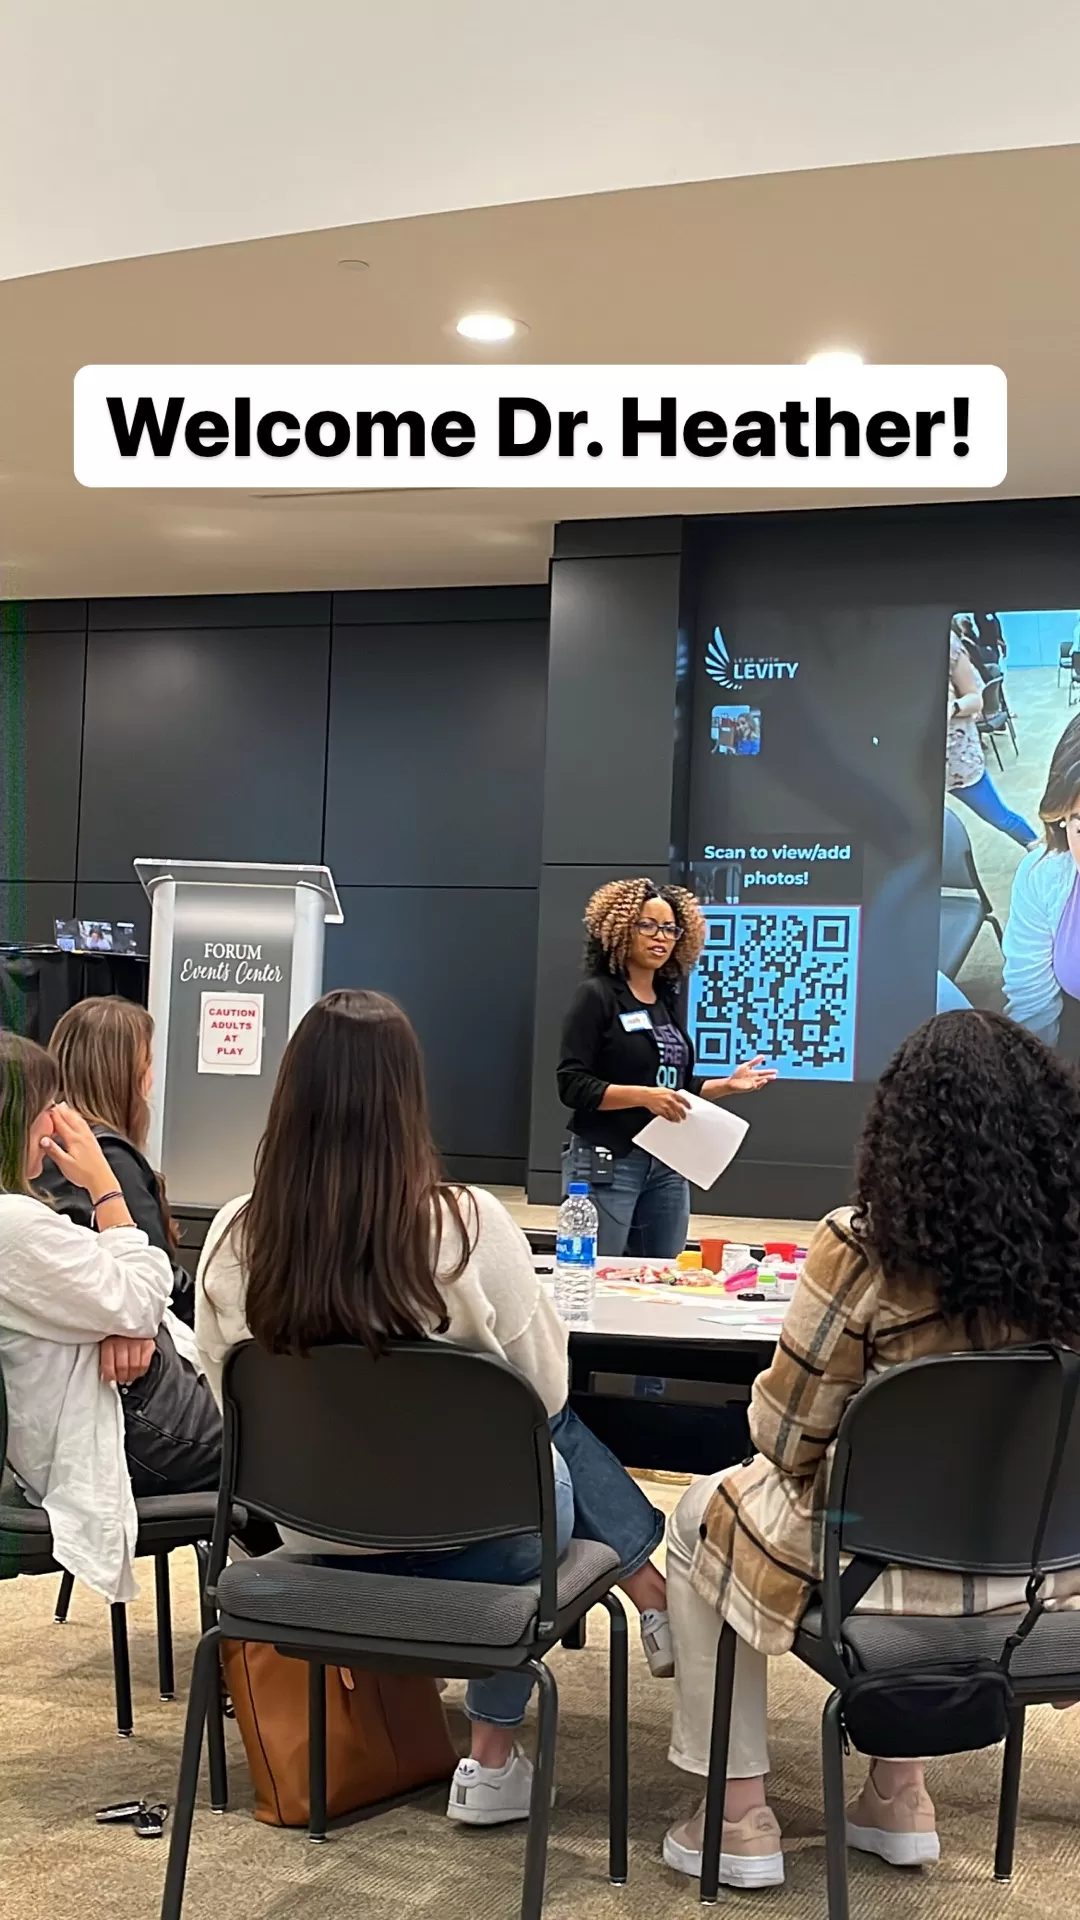 Welcome Dr. Heather